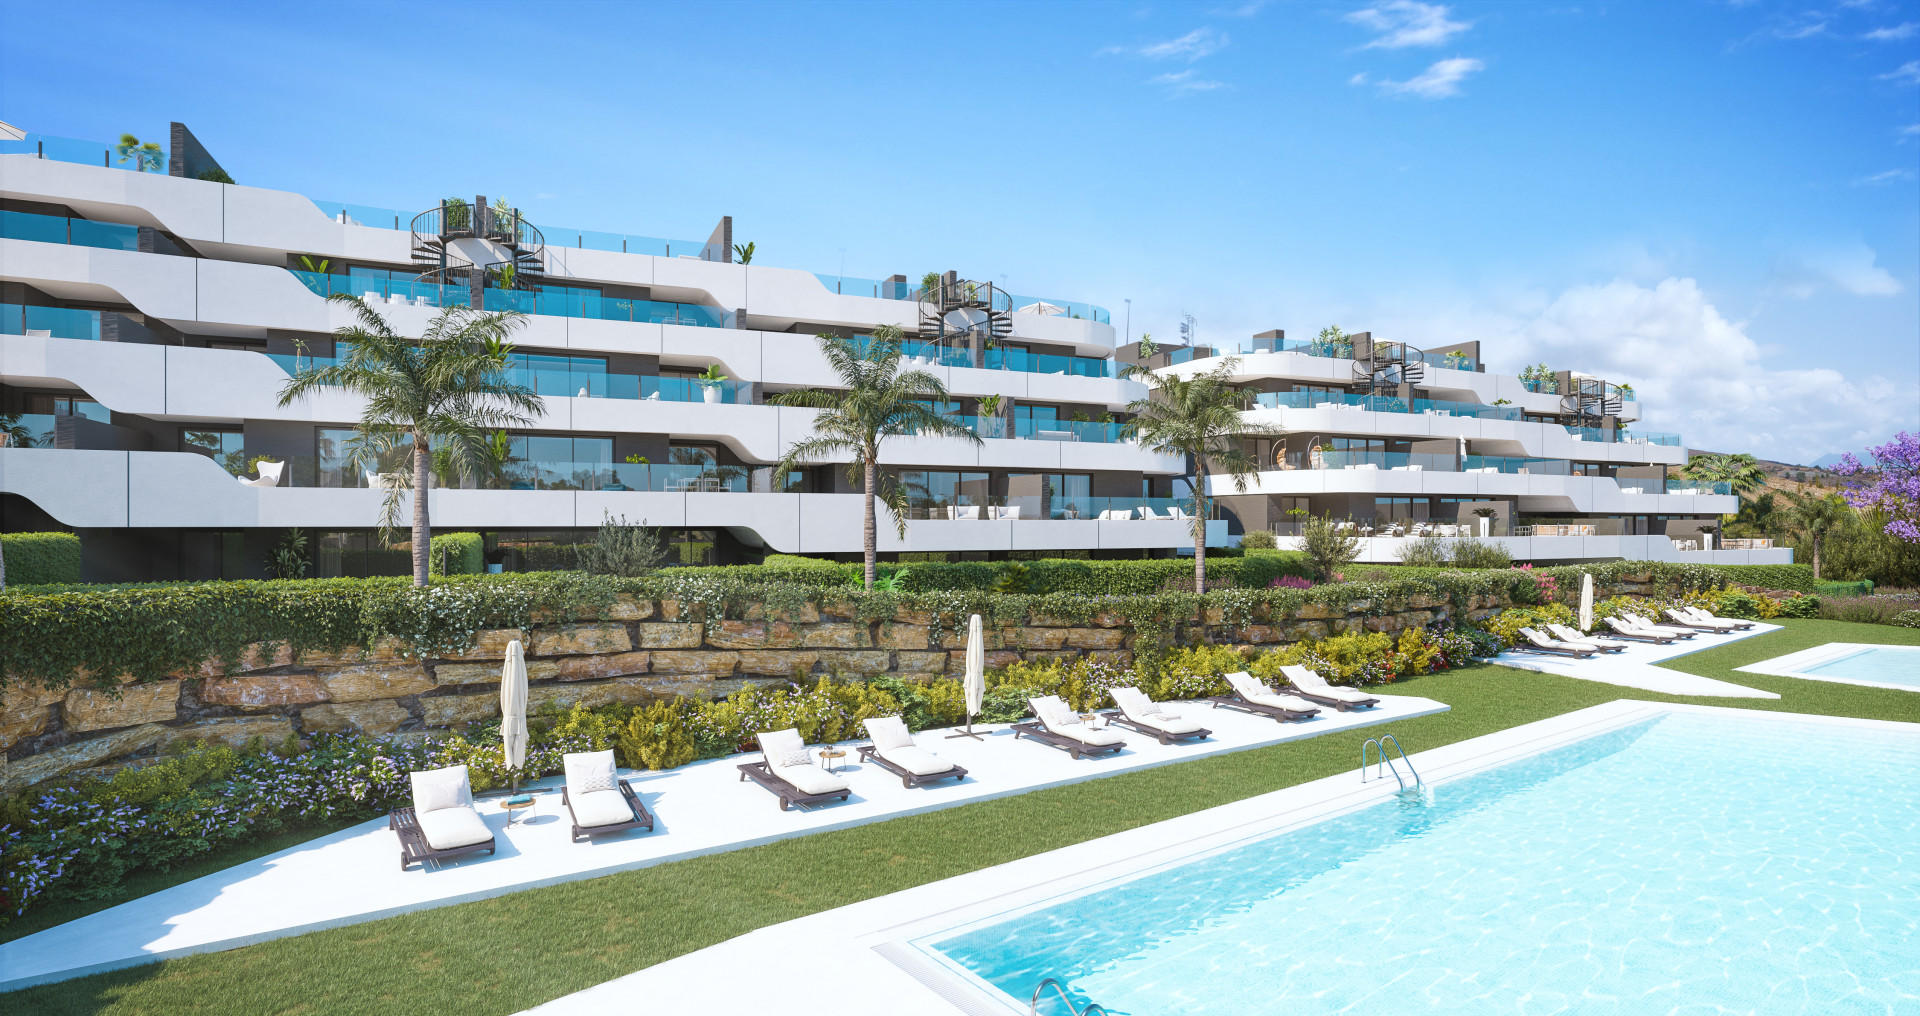 Oasis 325 Phase II: 2 and 3 bedroom apartments in the area of La Resina, Estepona.